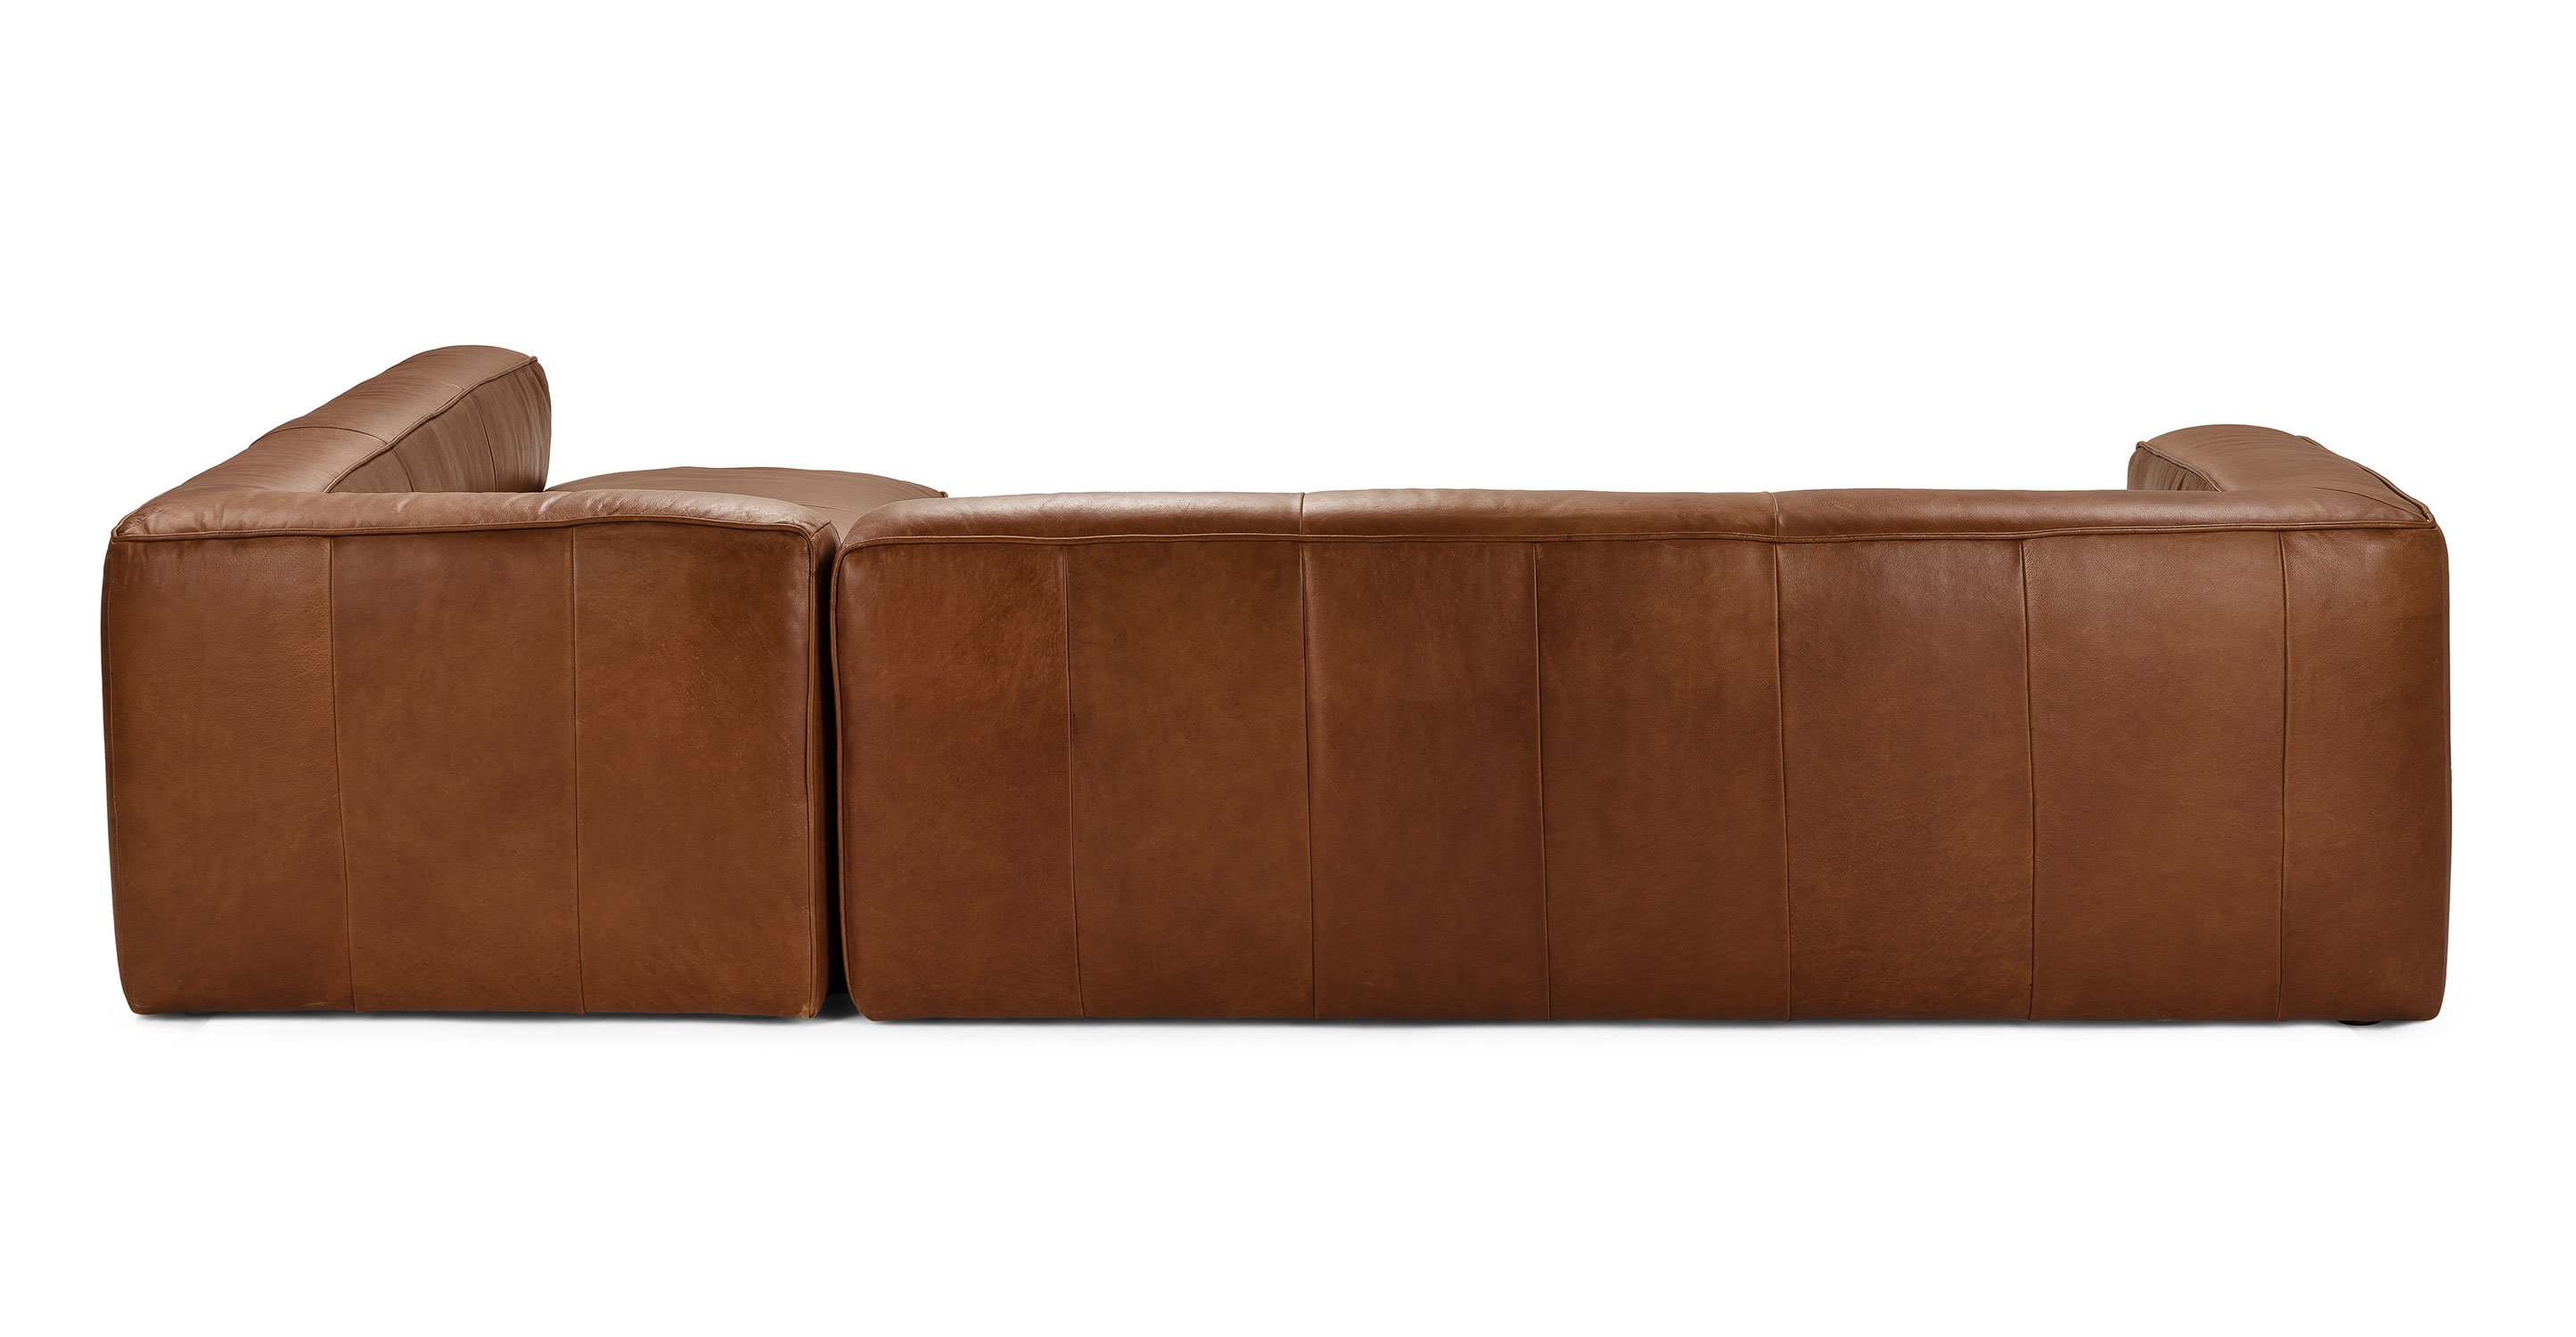 Mello Taos Brown Right Arm Corner Sectional - Image 3